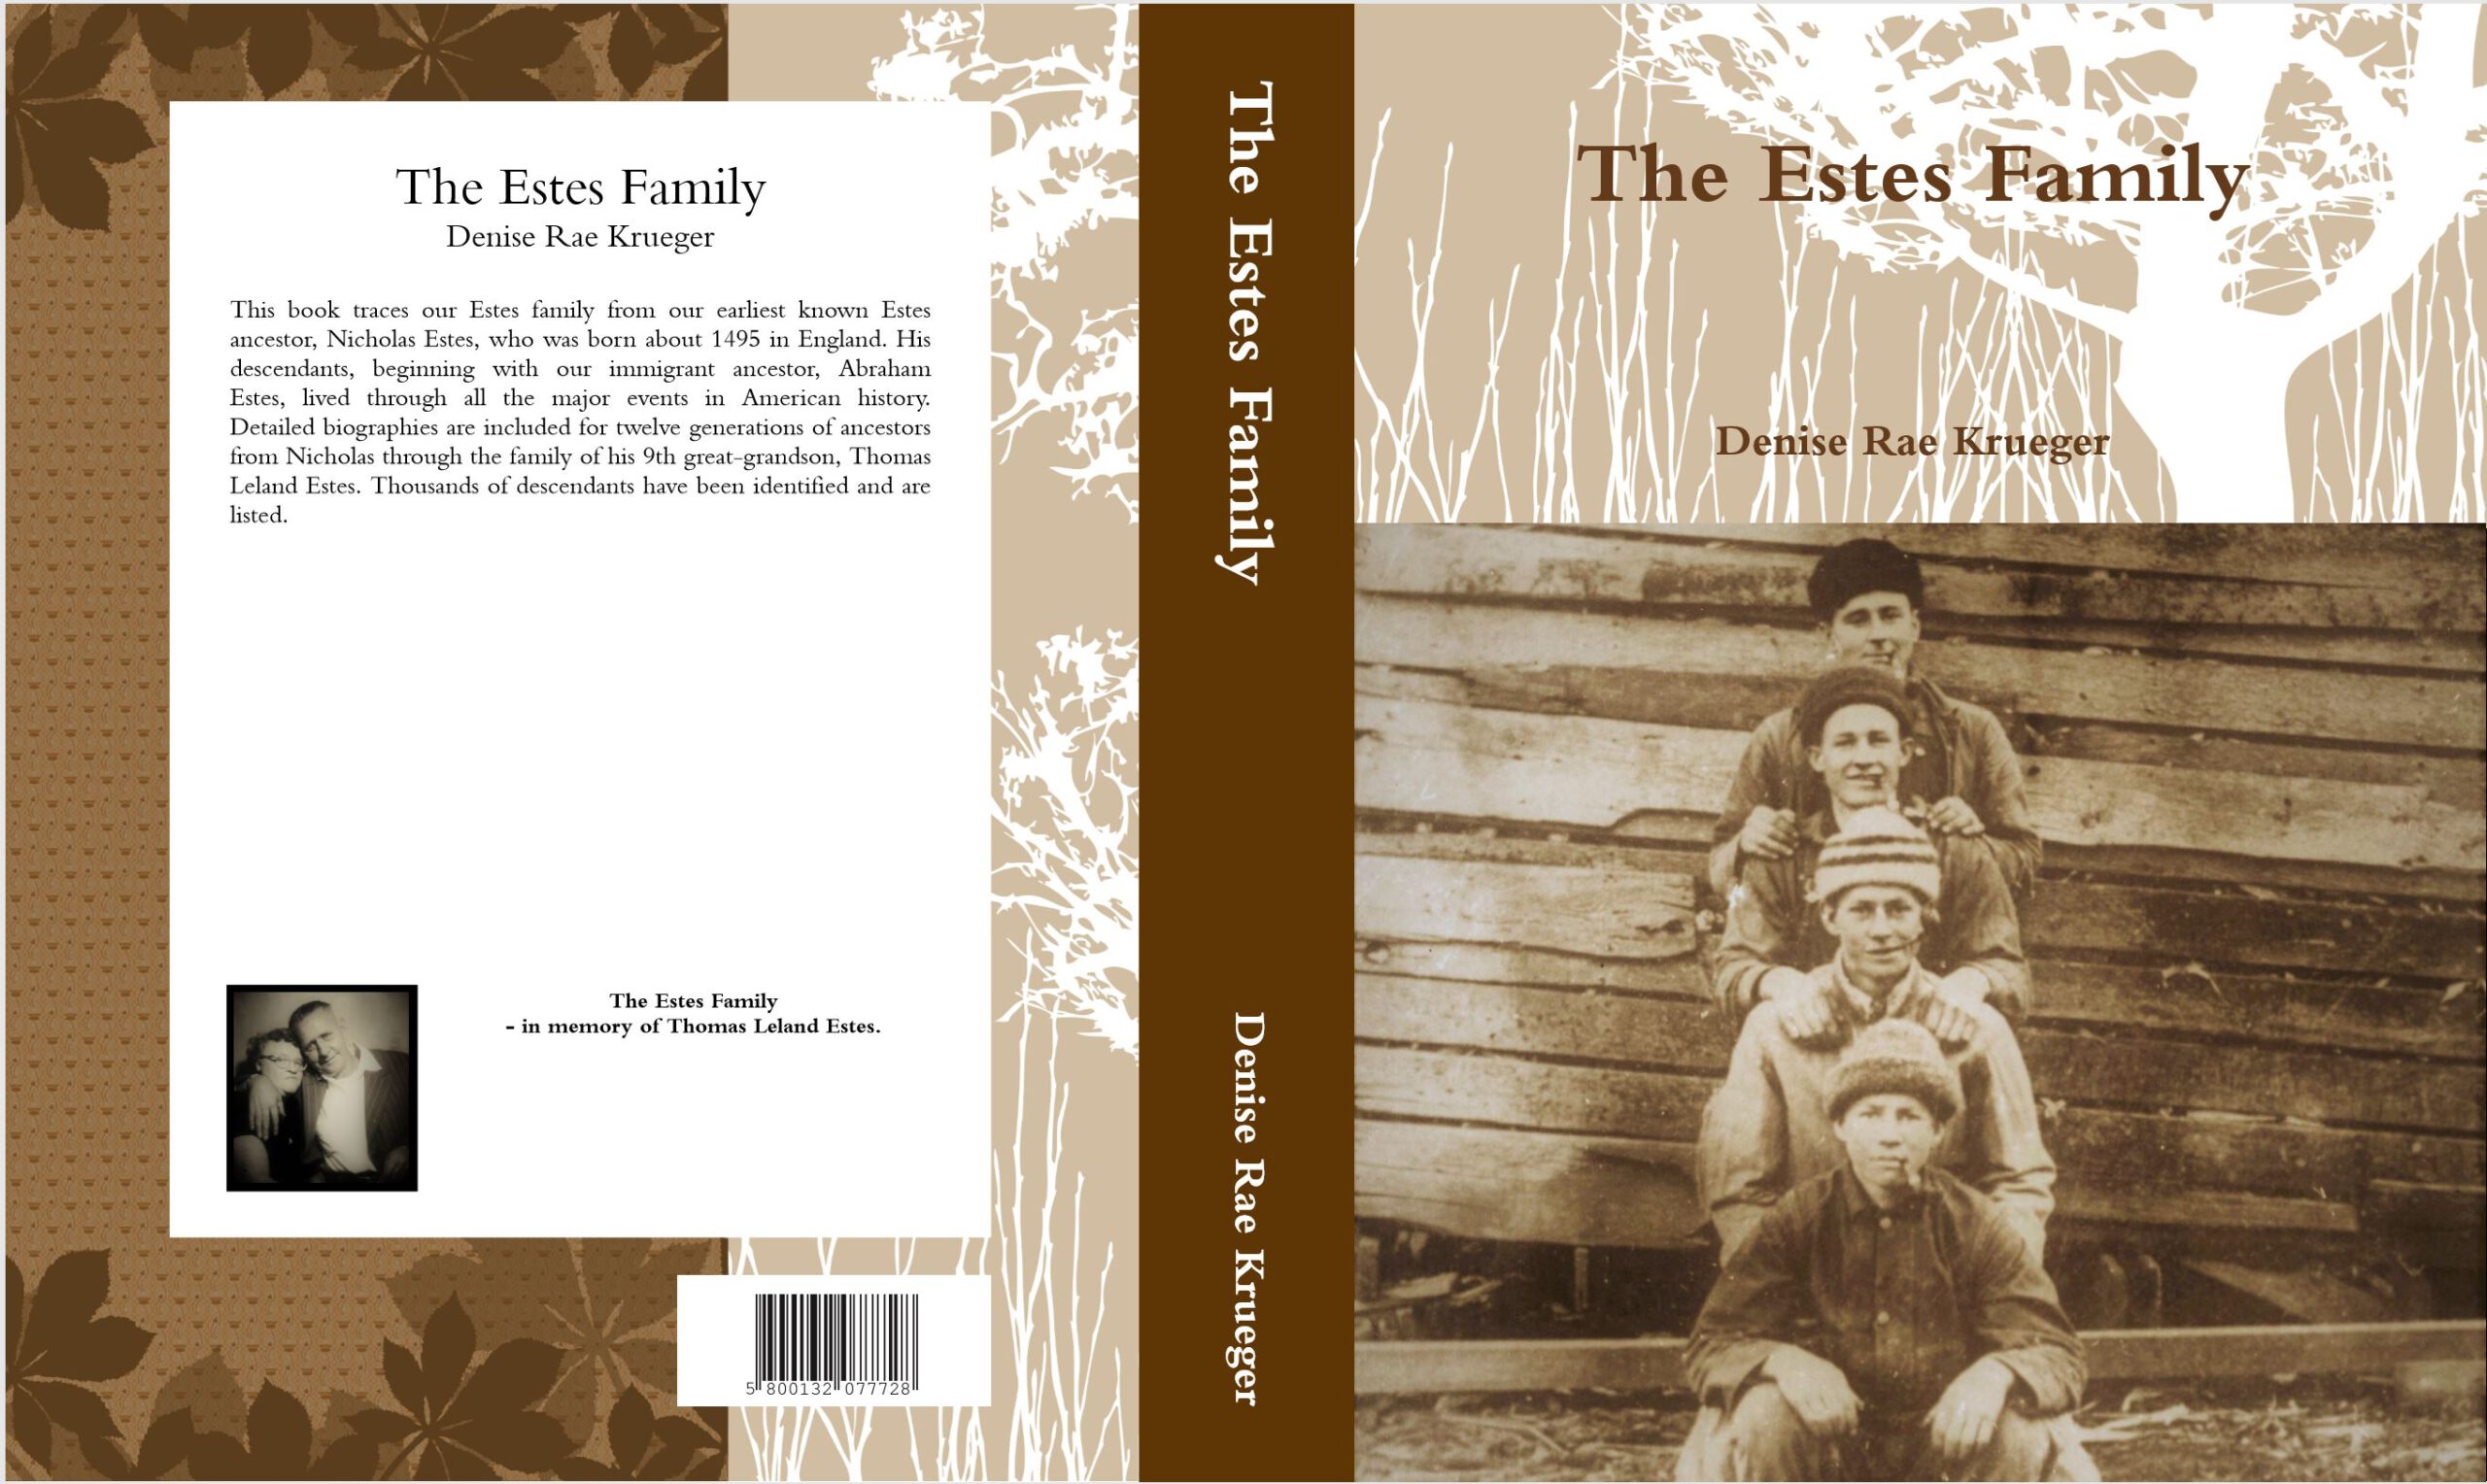 The Estes Family book is now available!